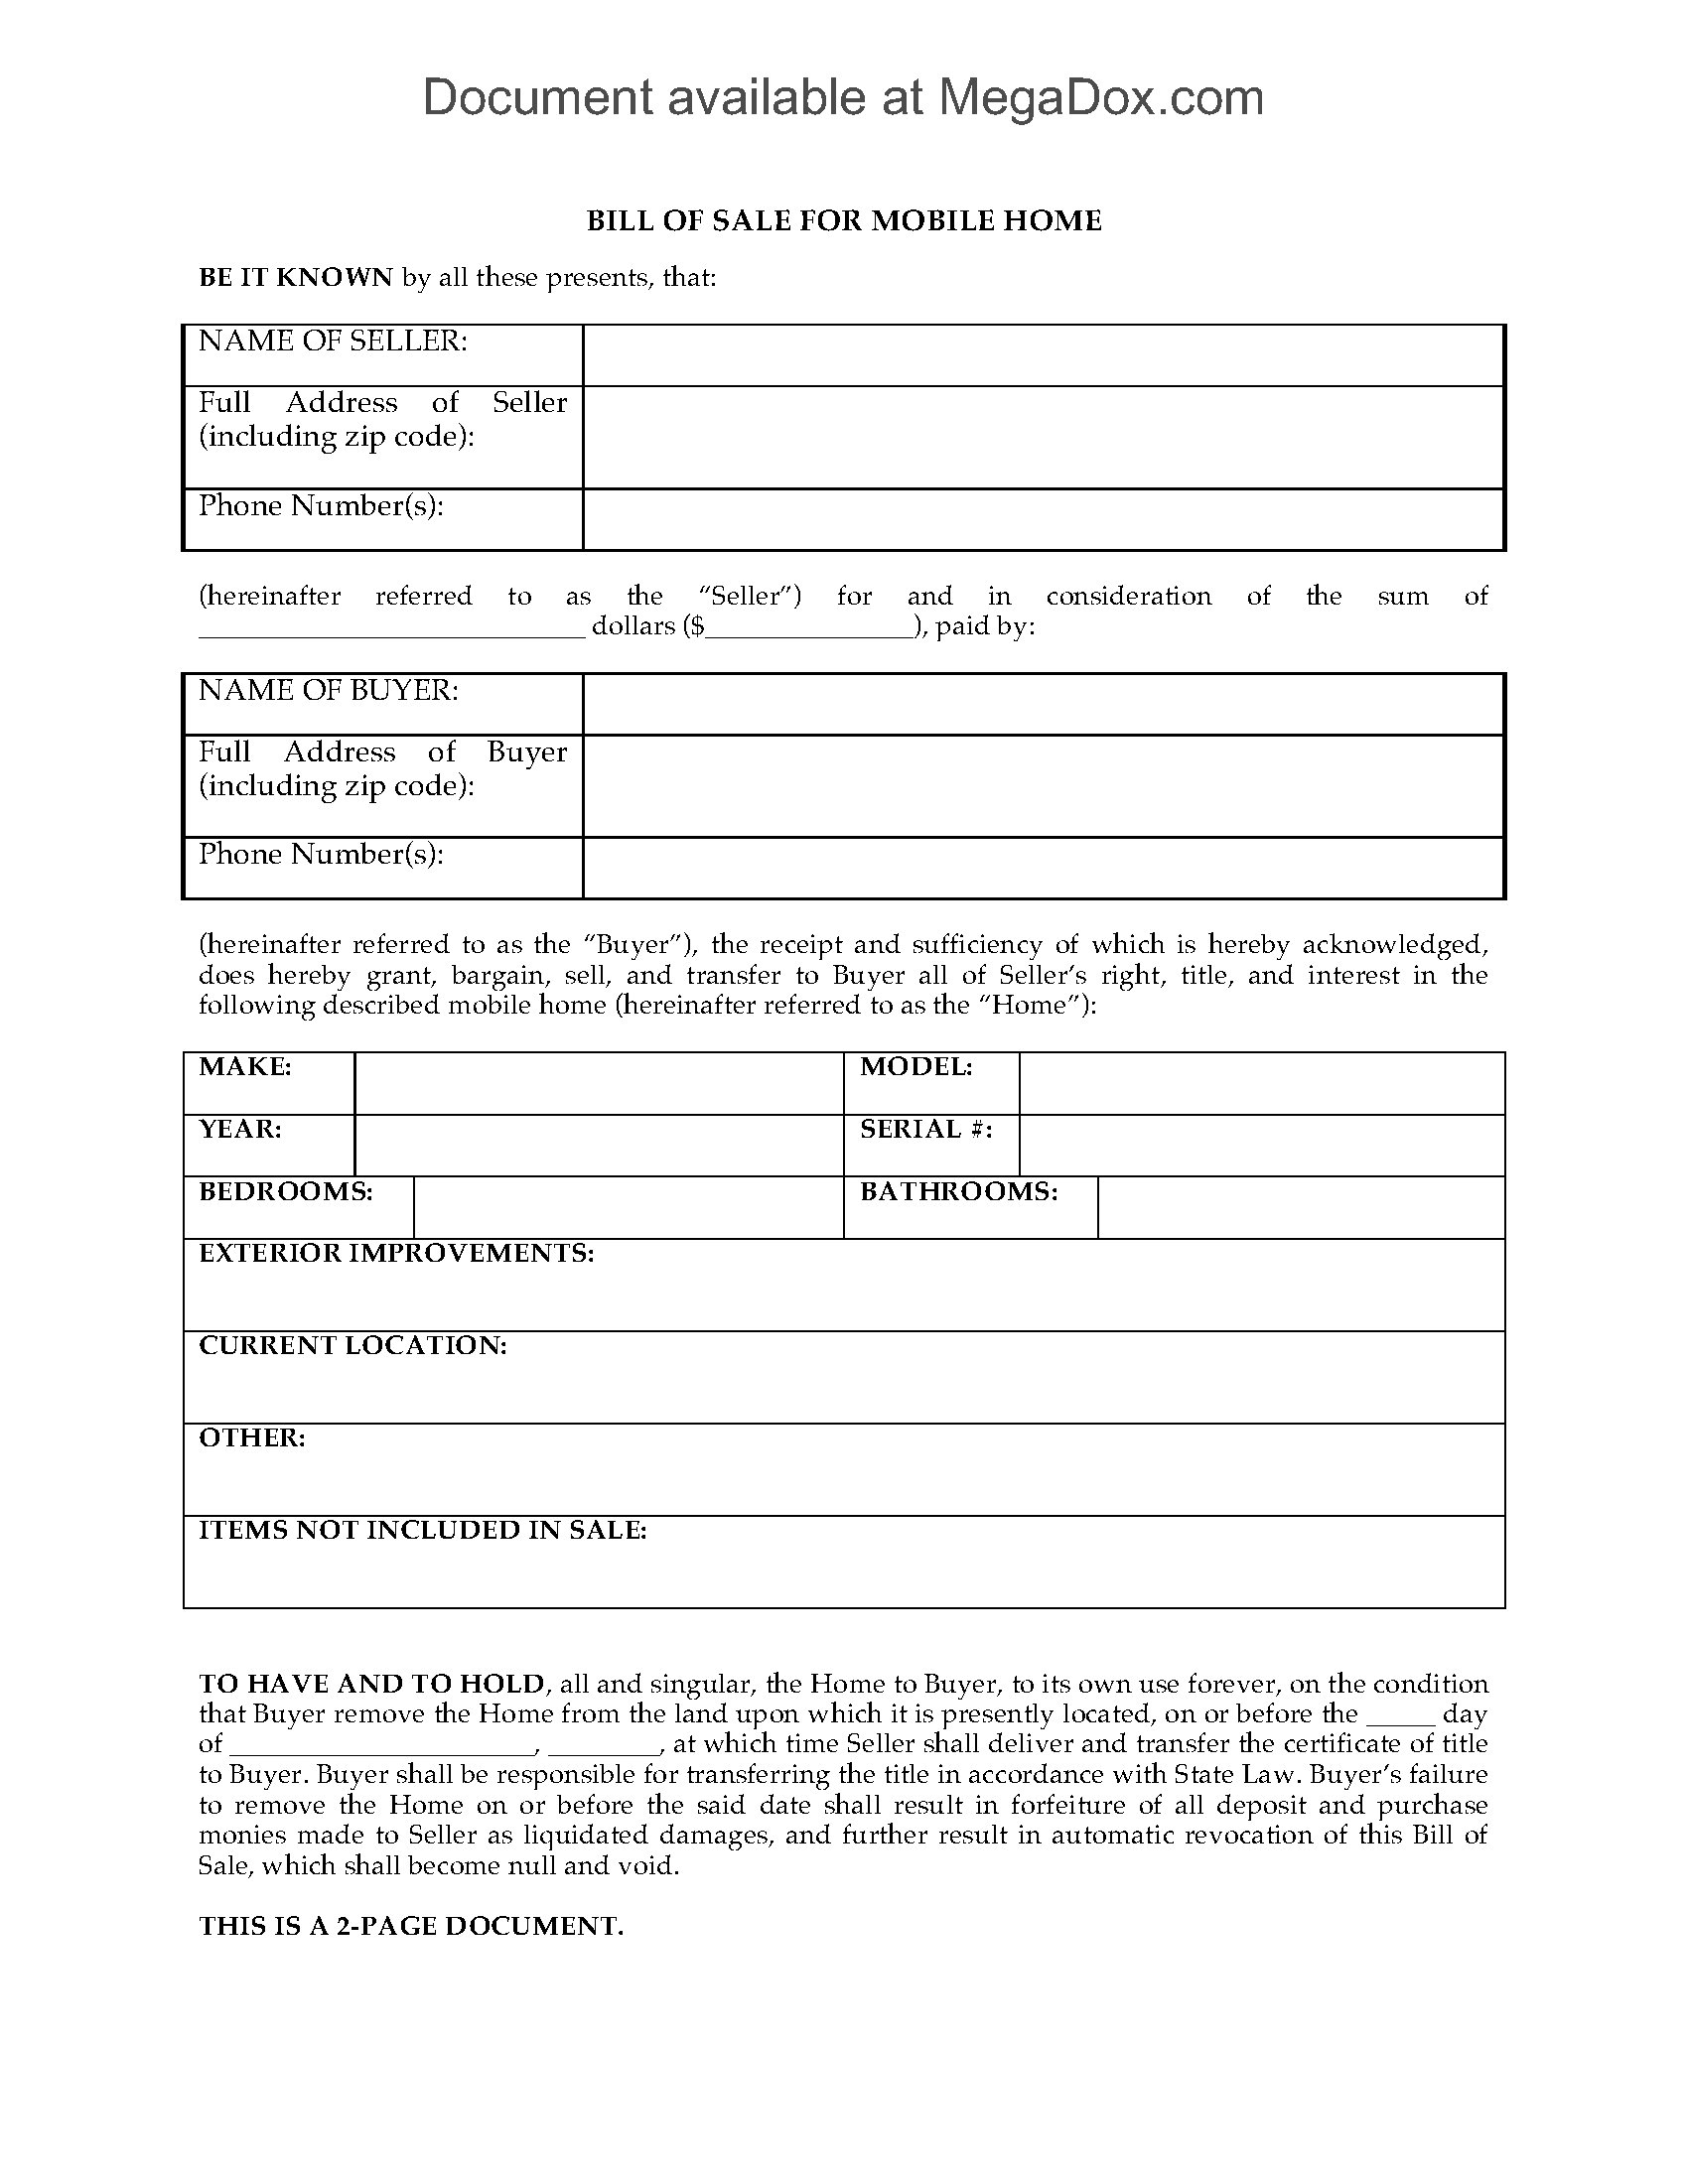 Arkansas Bill of Sale Form for Mobile Home Legal Forms and Business